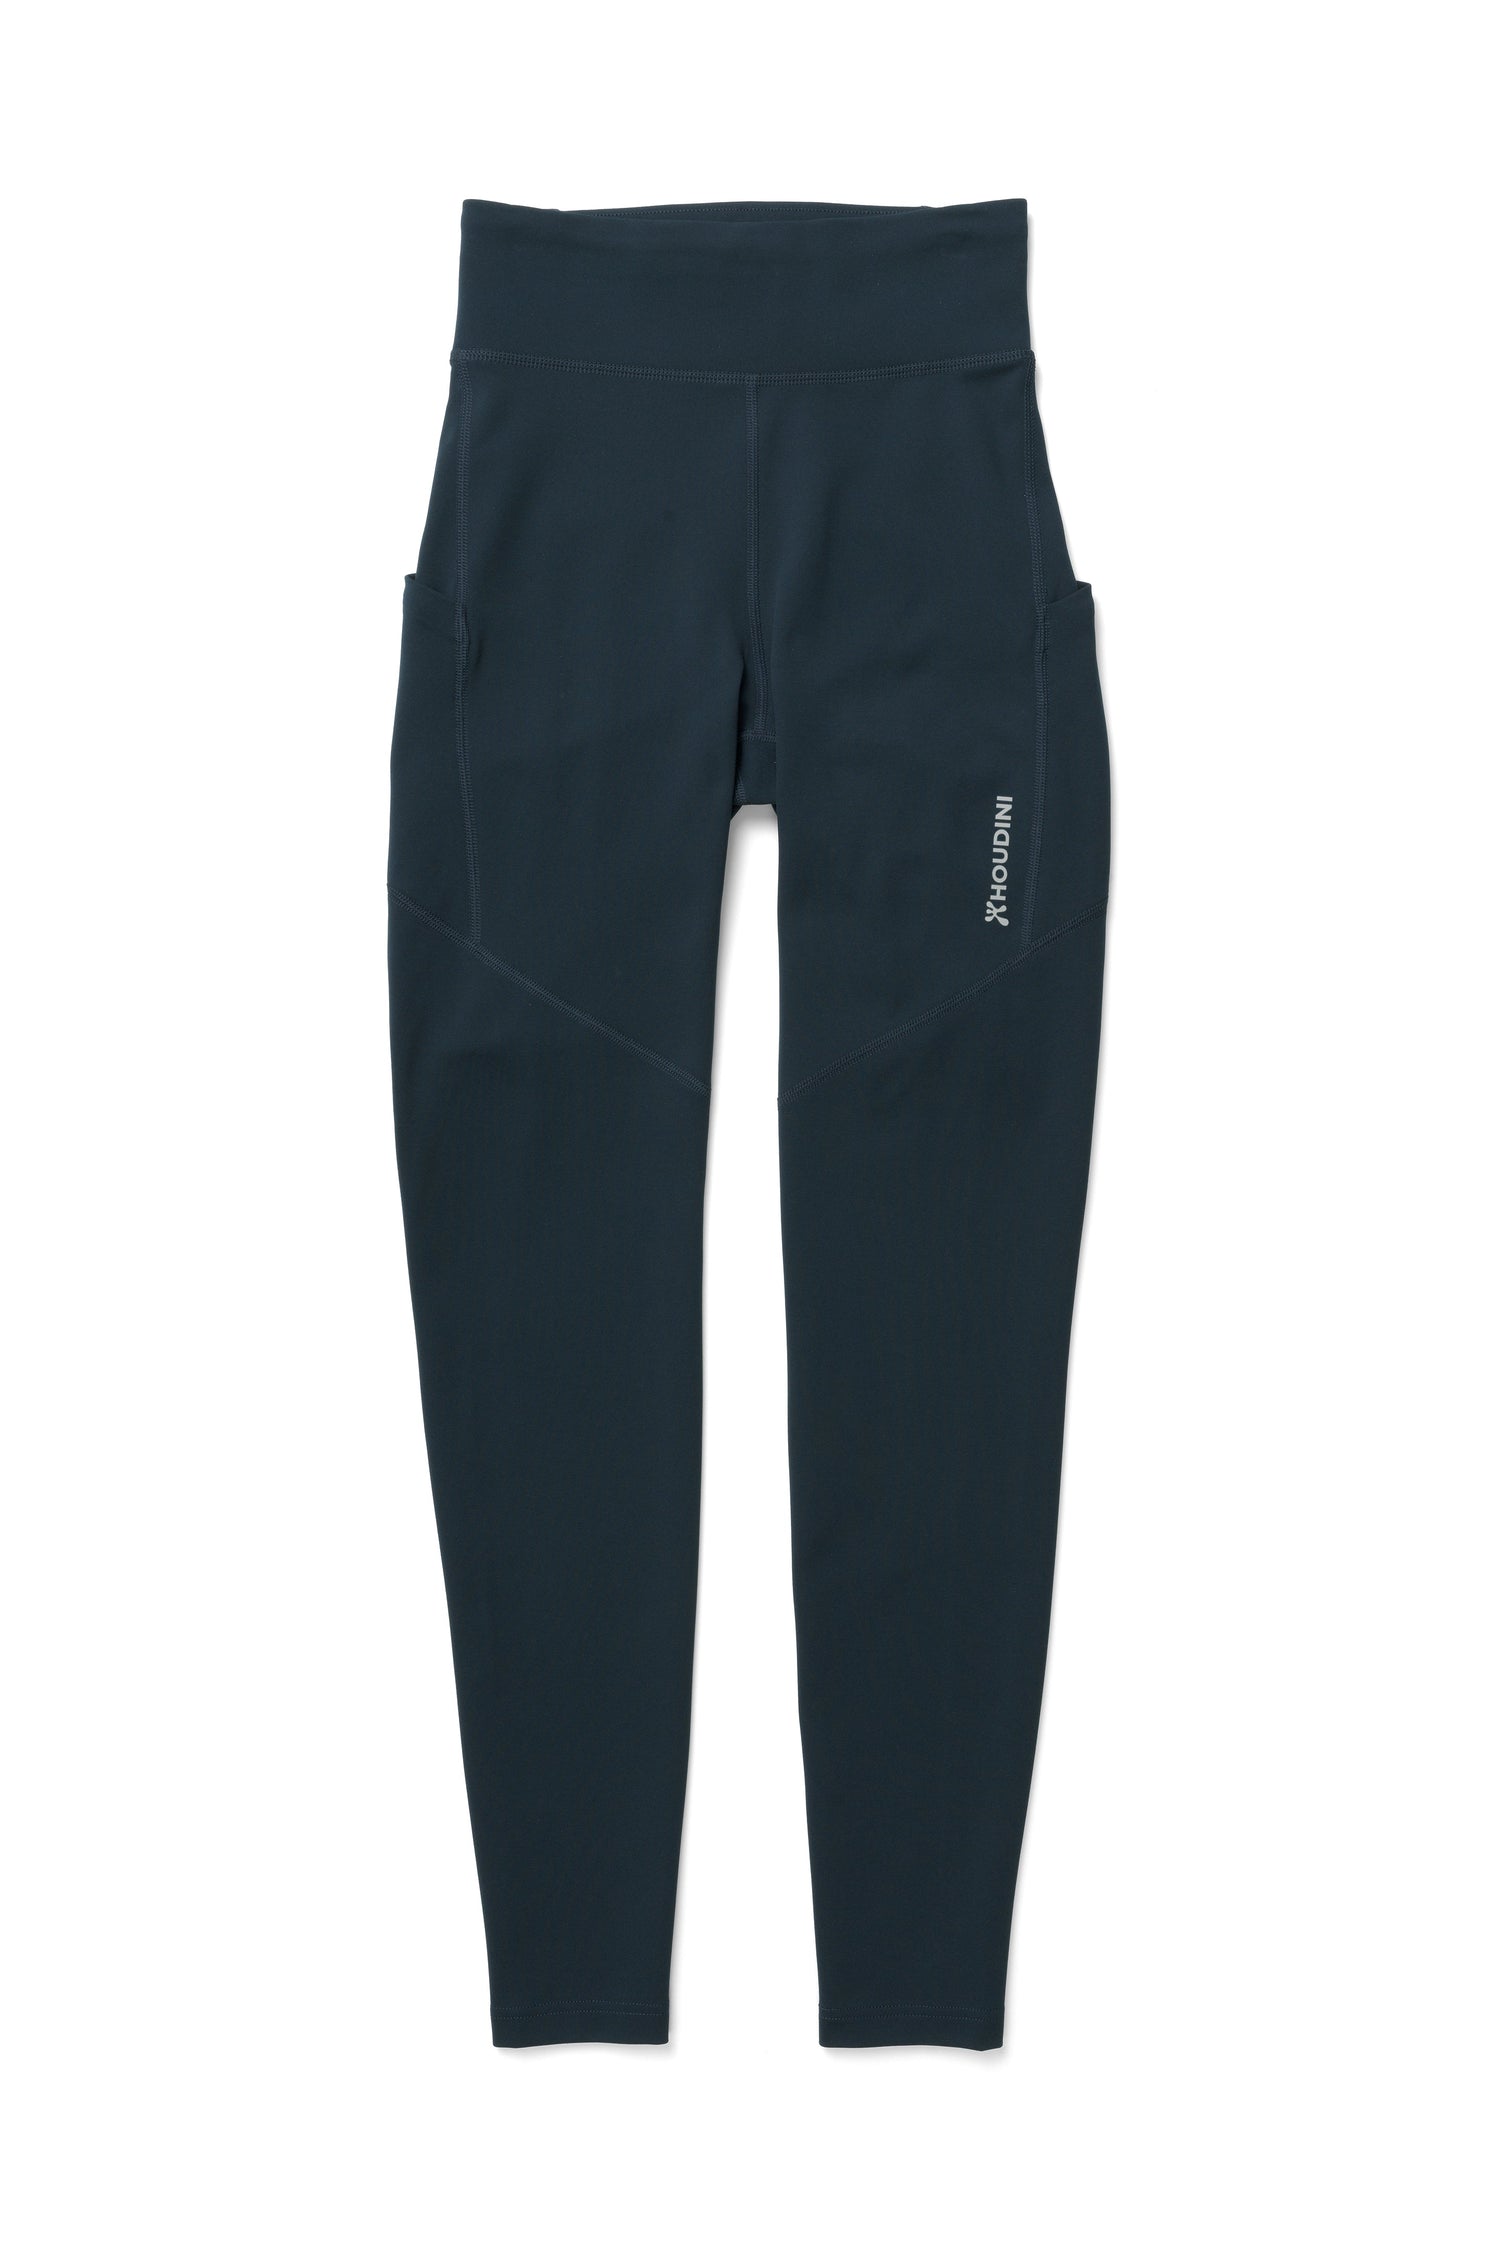 Houdini W's Adventure Tights - Recycled Polyester Blue Illusion Pants